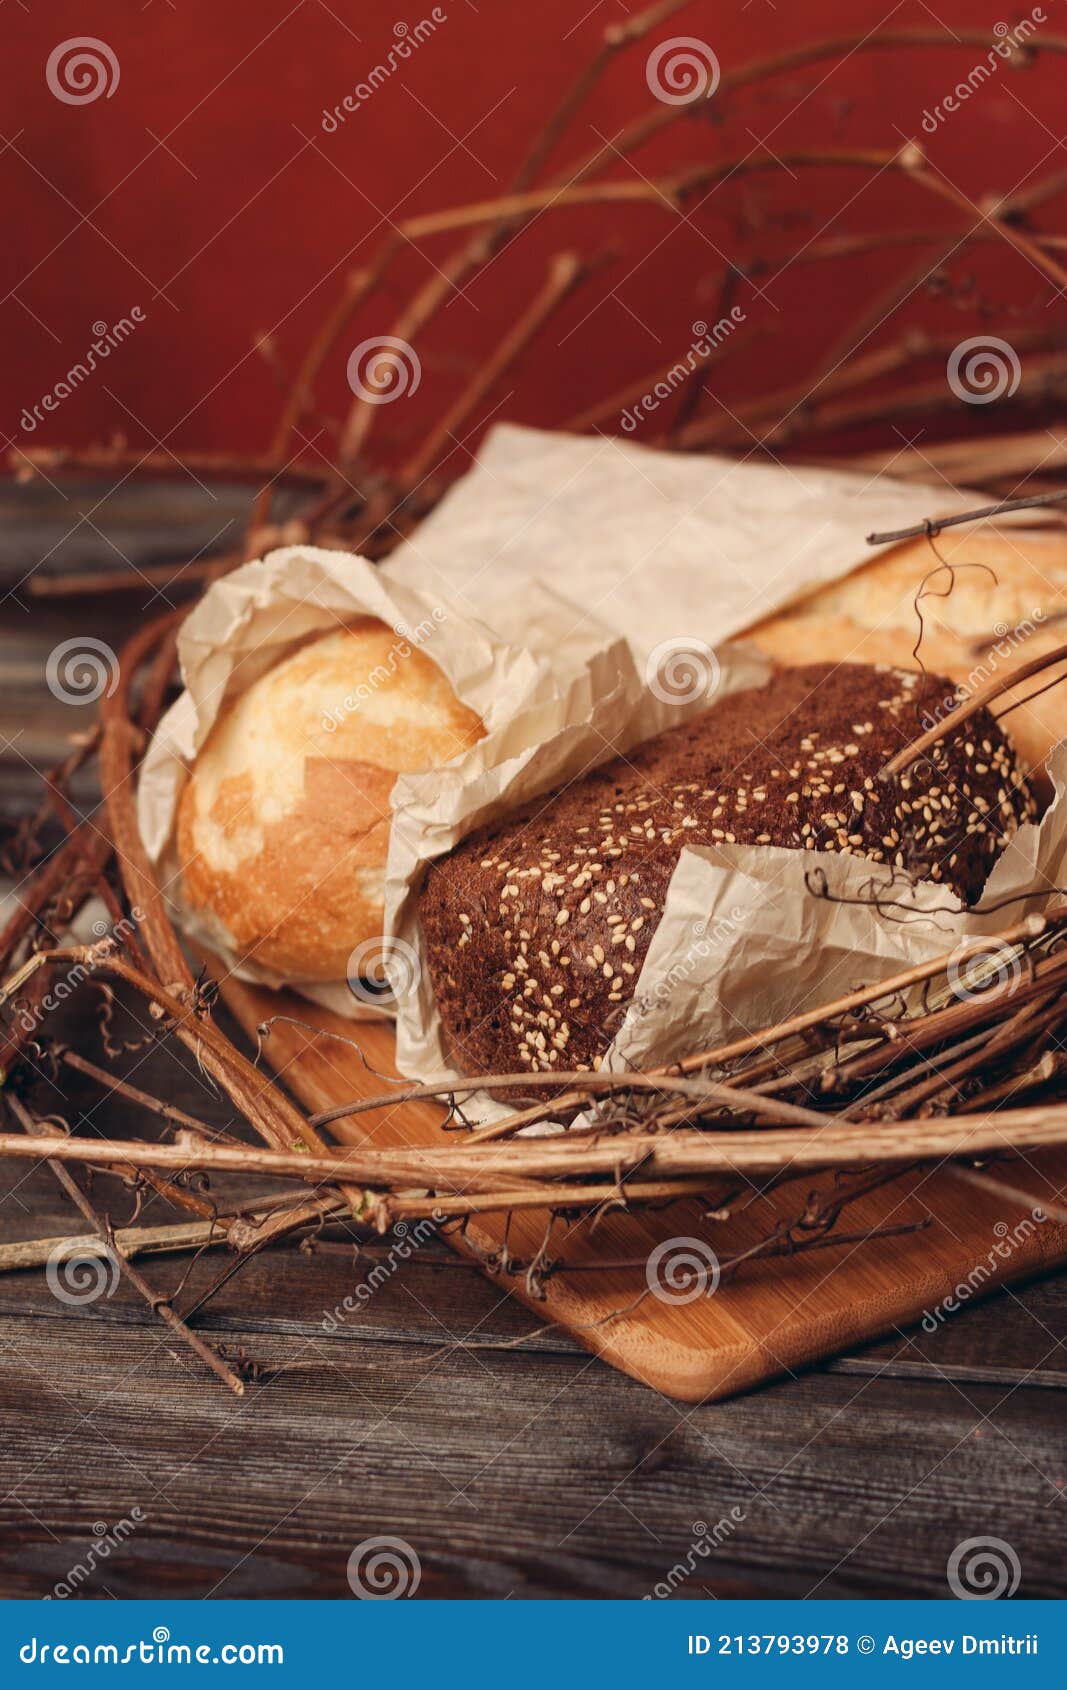 Baking Loaf of Bread Flour Product in a Nest on a Wooden Table